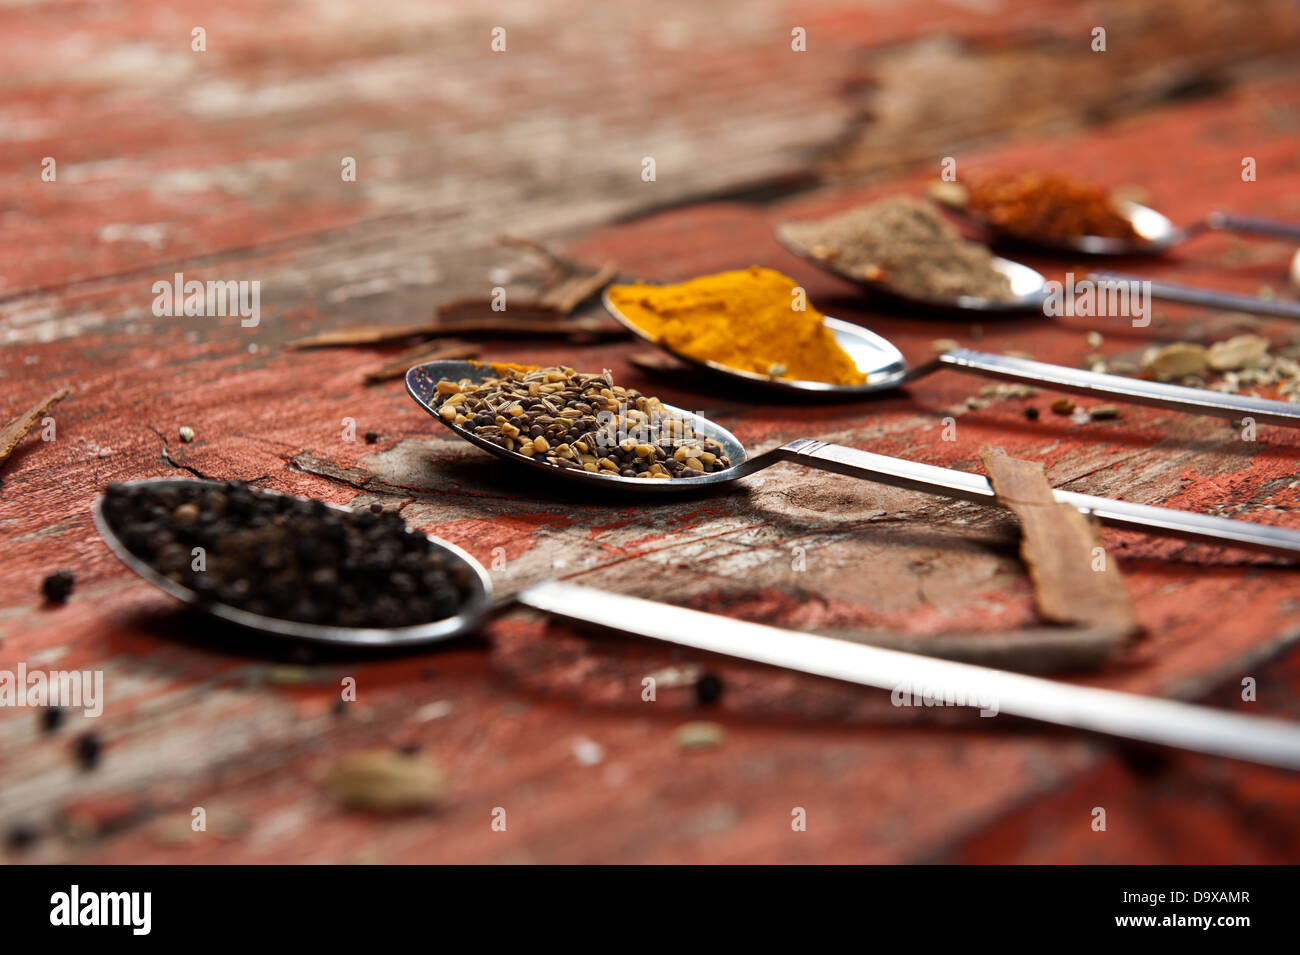 Table spoons heaped with different spices on an orange textured wooden surface. Artistic use of shallow depth of field. Stock Photo